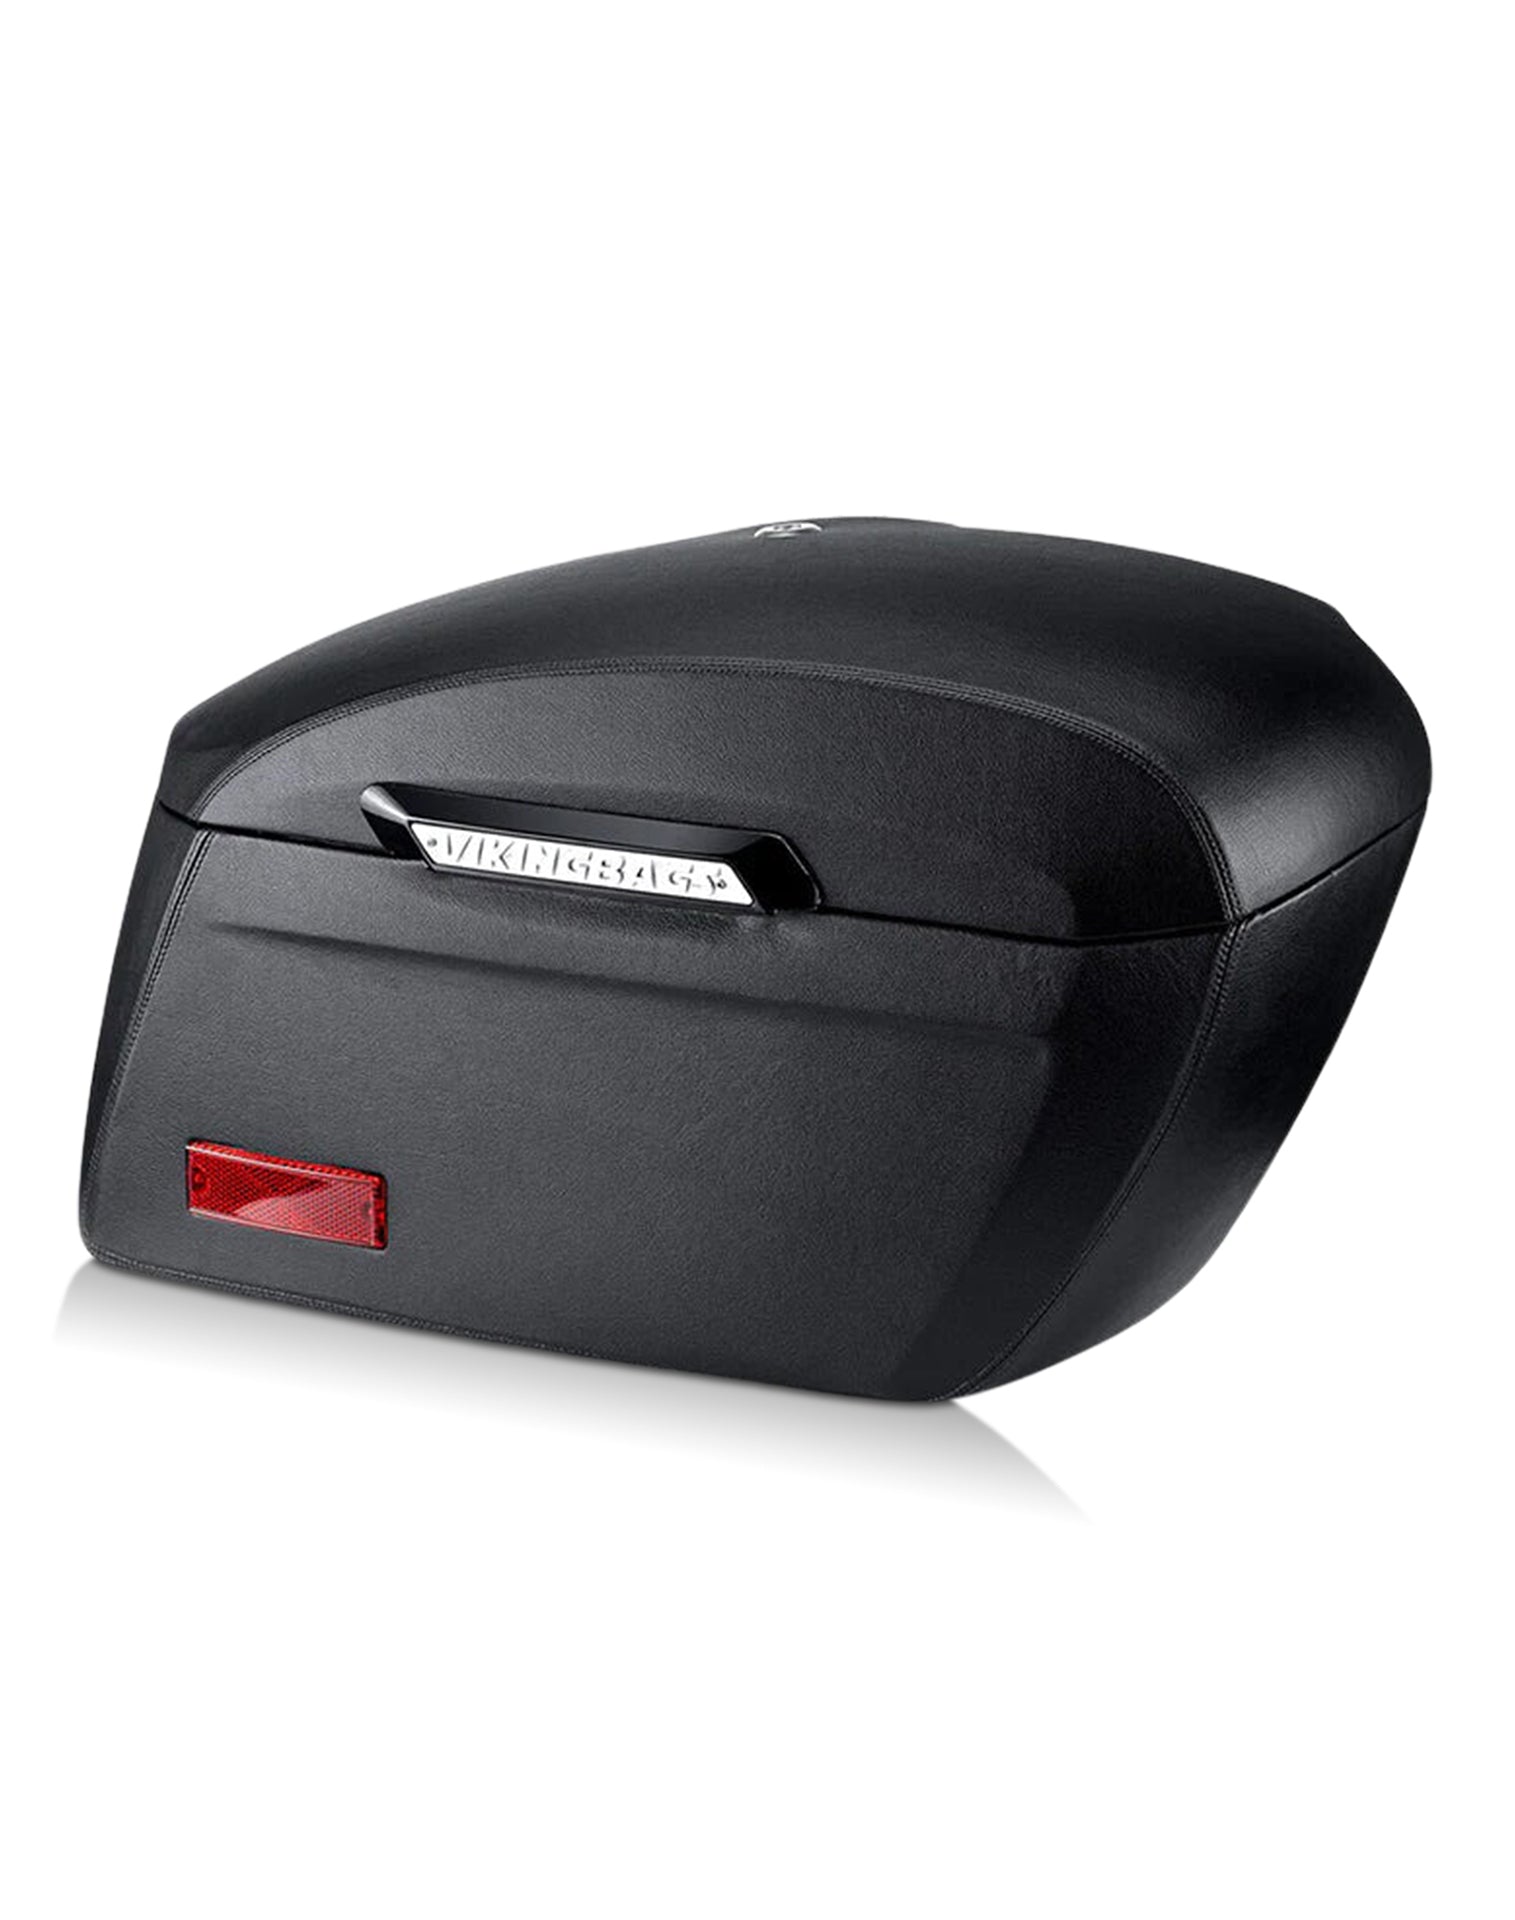 38L Lamellar Vale Extra Large Shock Cut-out Honda VTX 1300 S Leather Covered Motorcycle Hard Saddlebags Main View